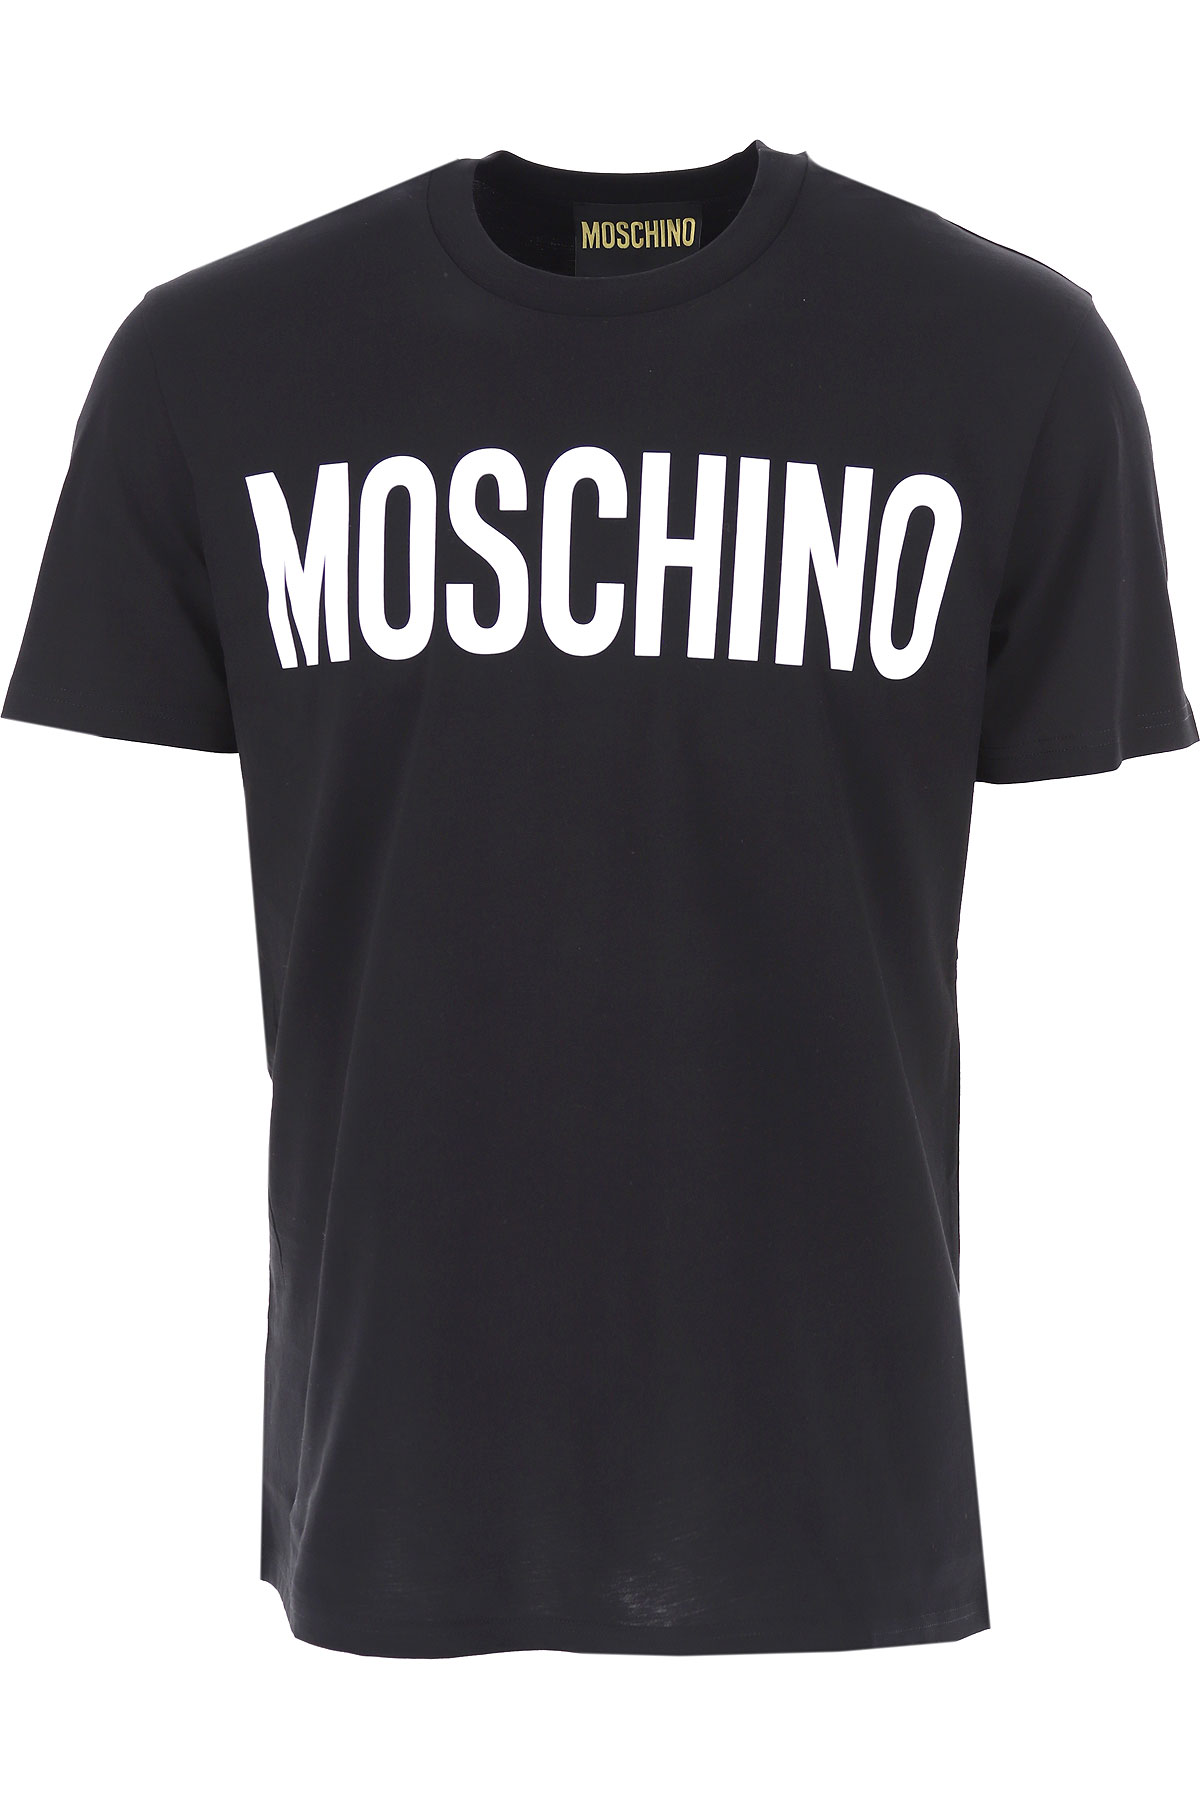 Mens Clothing Moschino, Style code: A0701-2041-1555